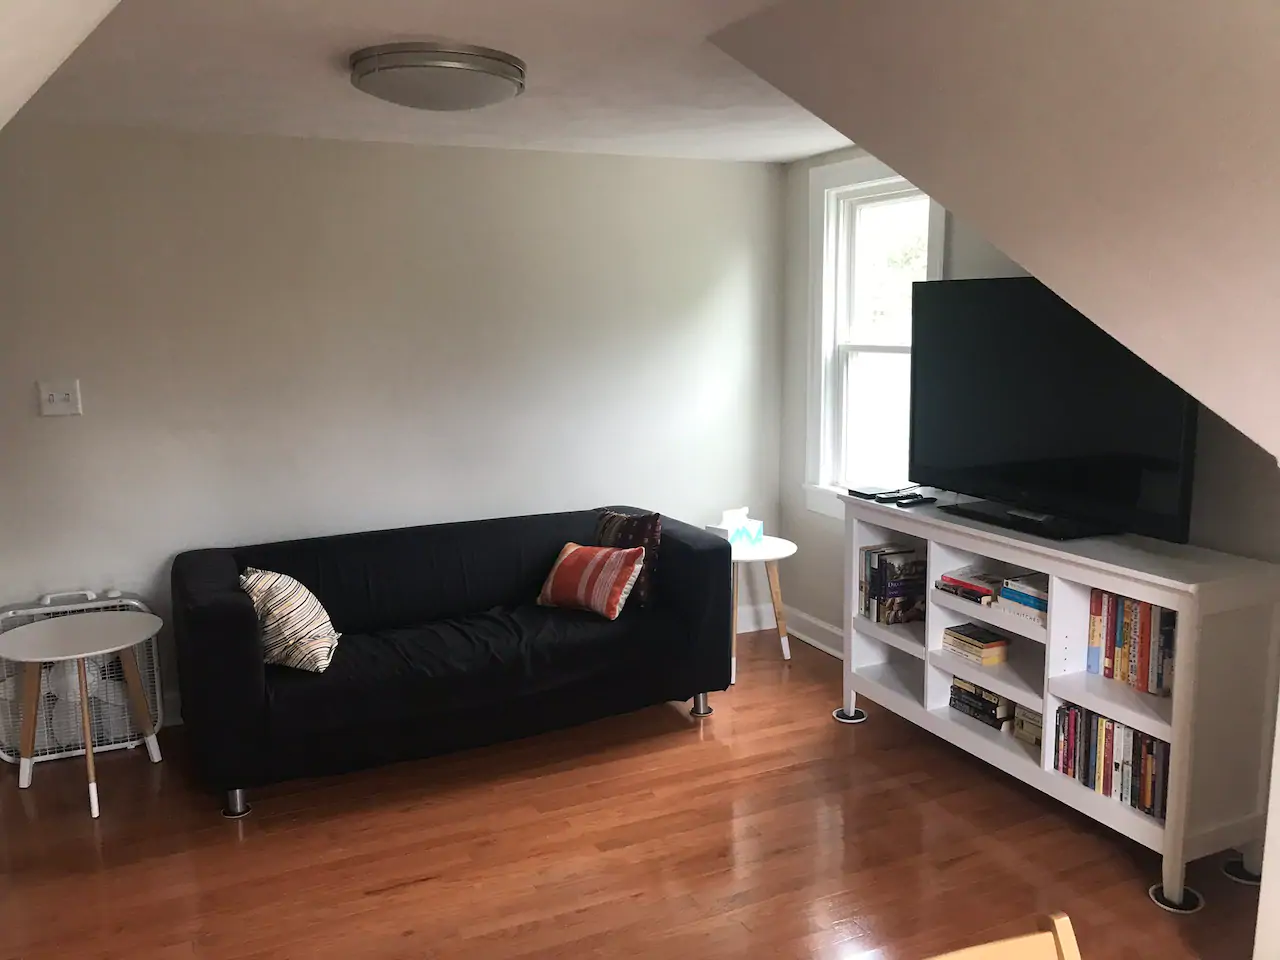 Photo of an apartment where you can stay in Syracuse during your New York road trip.